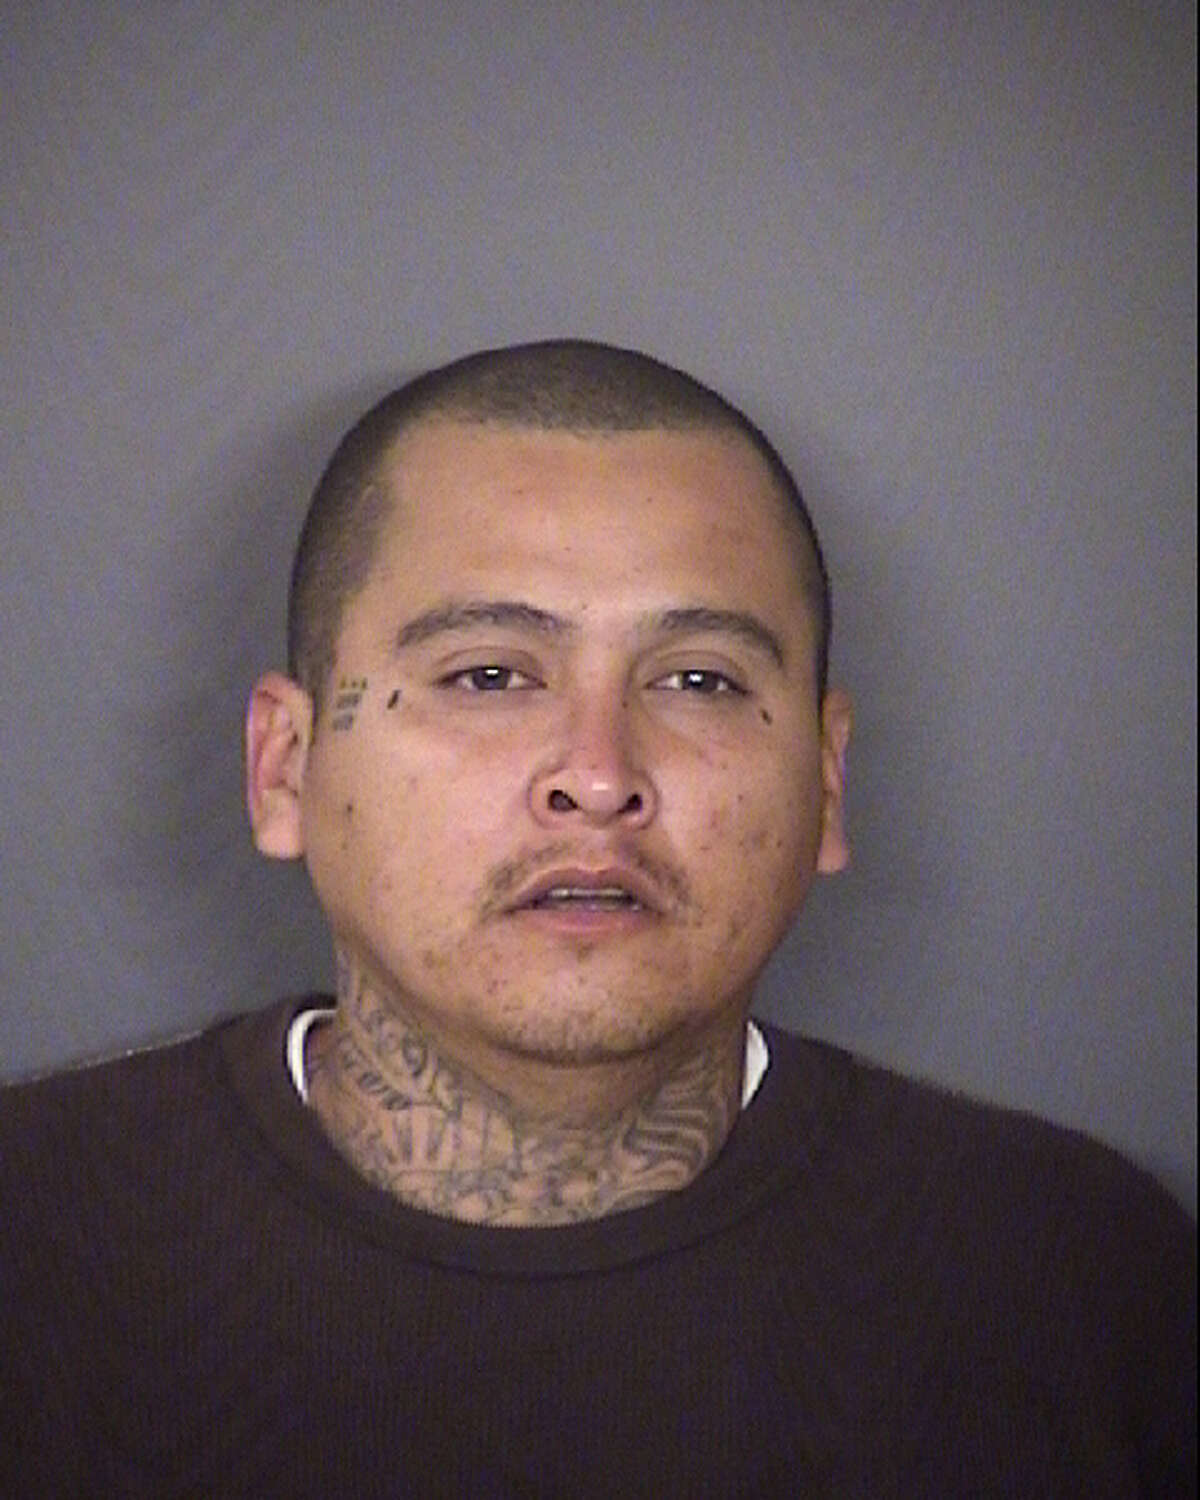 Danny Acosta, 30, faces a charge of aggravated robbery.